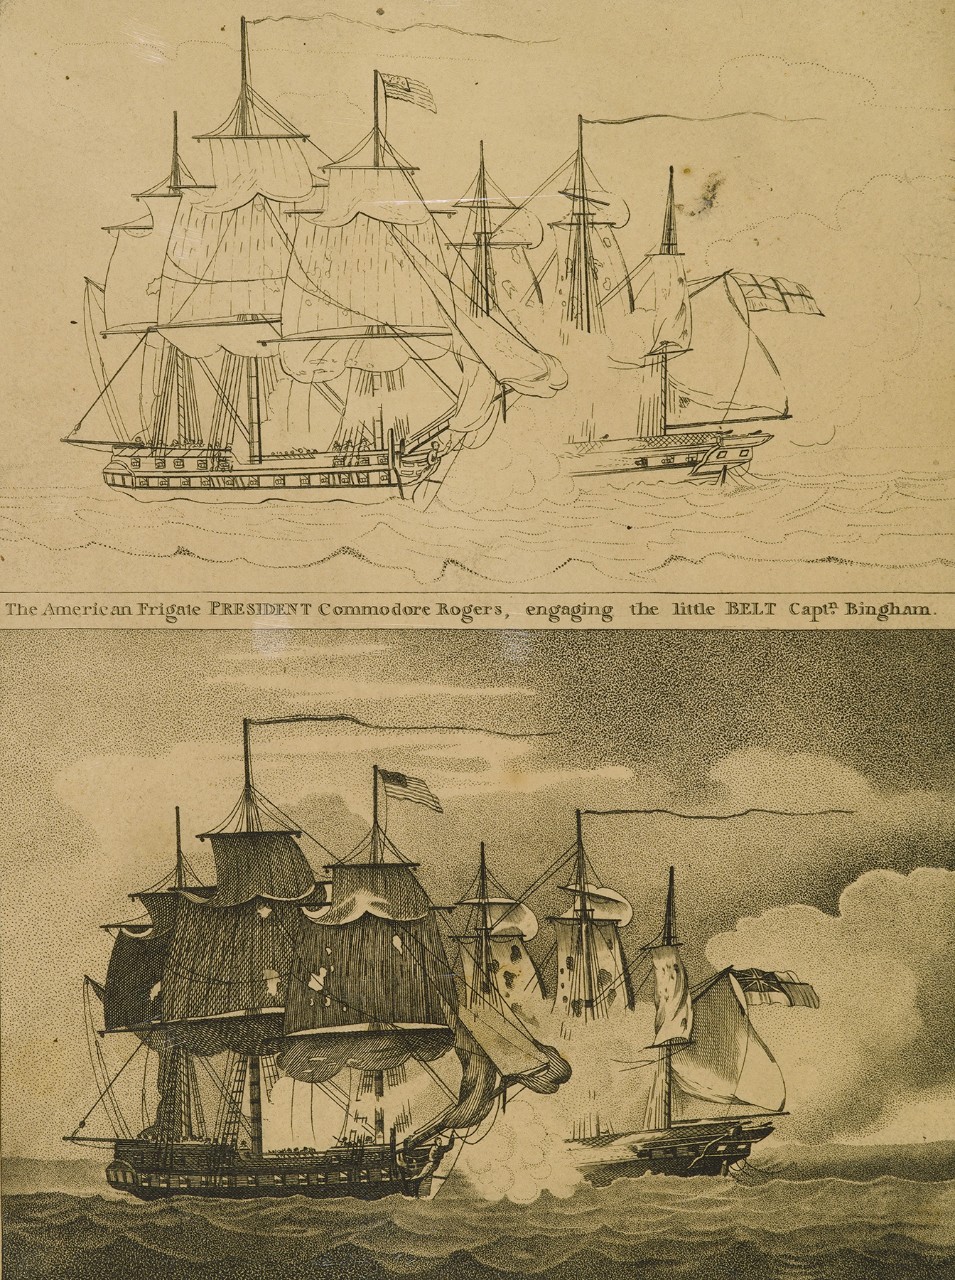 There are two prints of the same sailing ship battle, the top is incomplete, the bottom is finished.